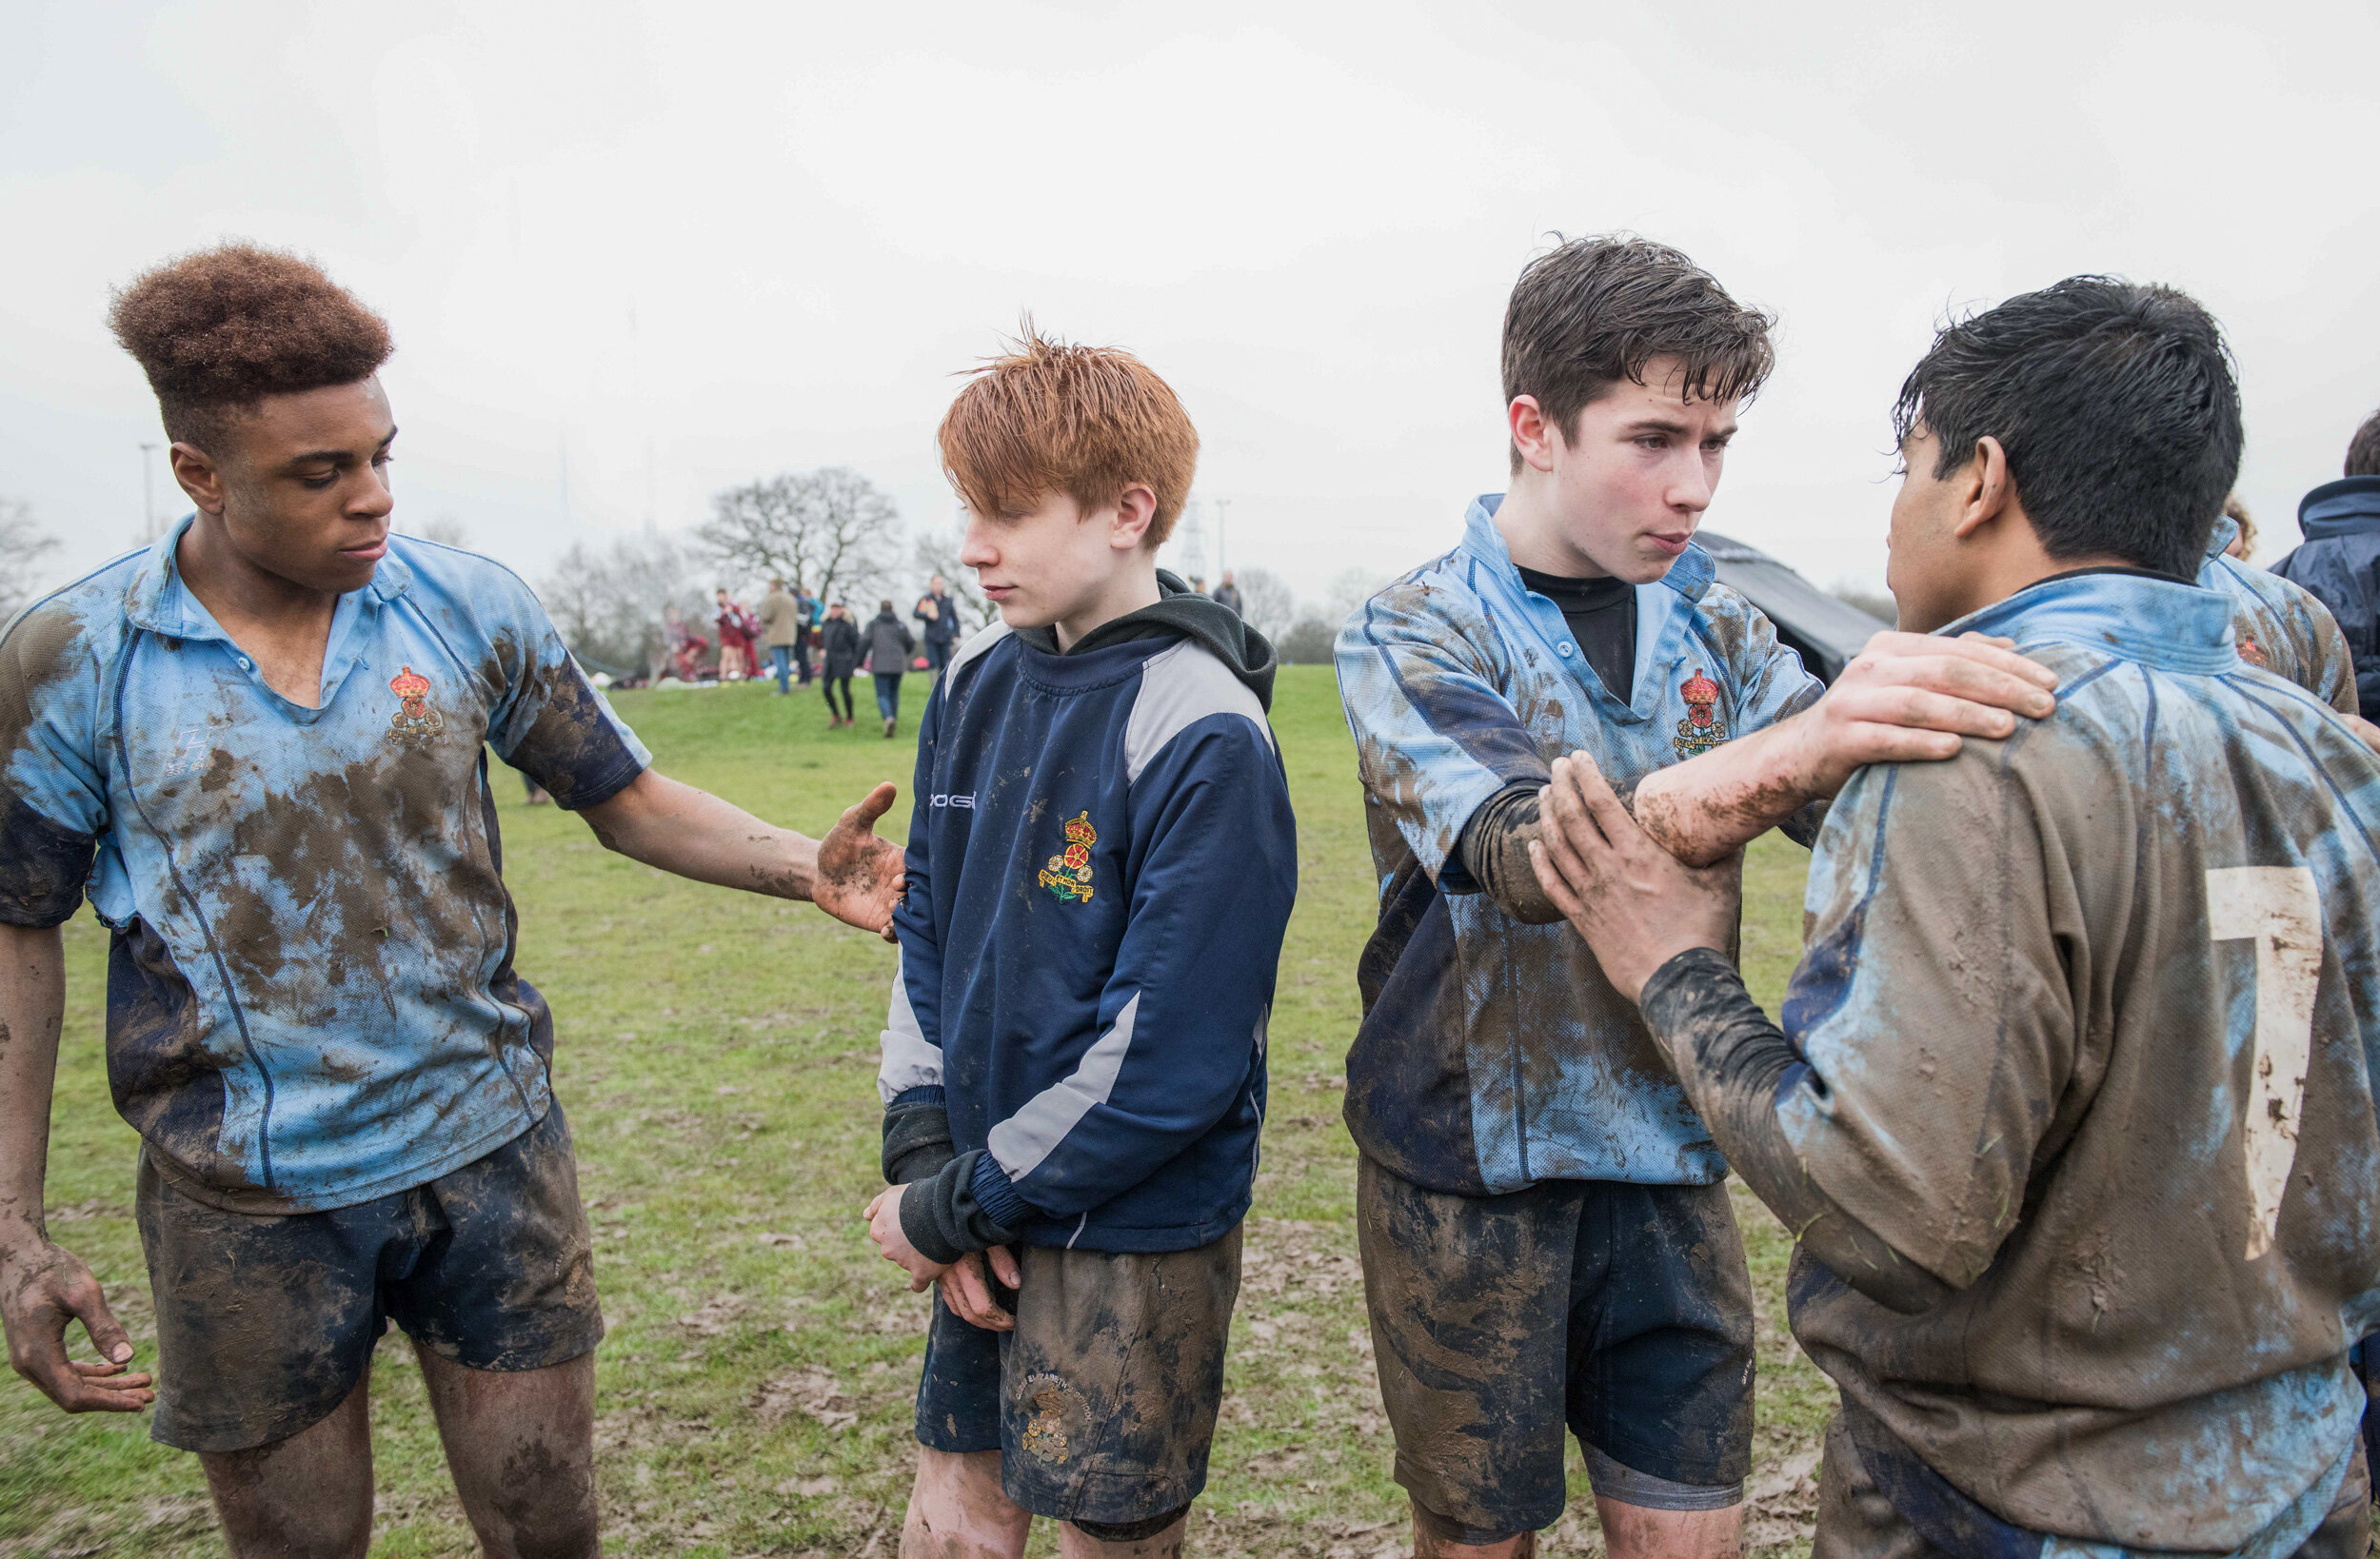  Queen Elizabeth’s School, Barnet, UK.  Seven-a-side rugby tournament, played in the rain and mud.  Shot by Eleanor Bentall, photographer. 